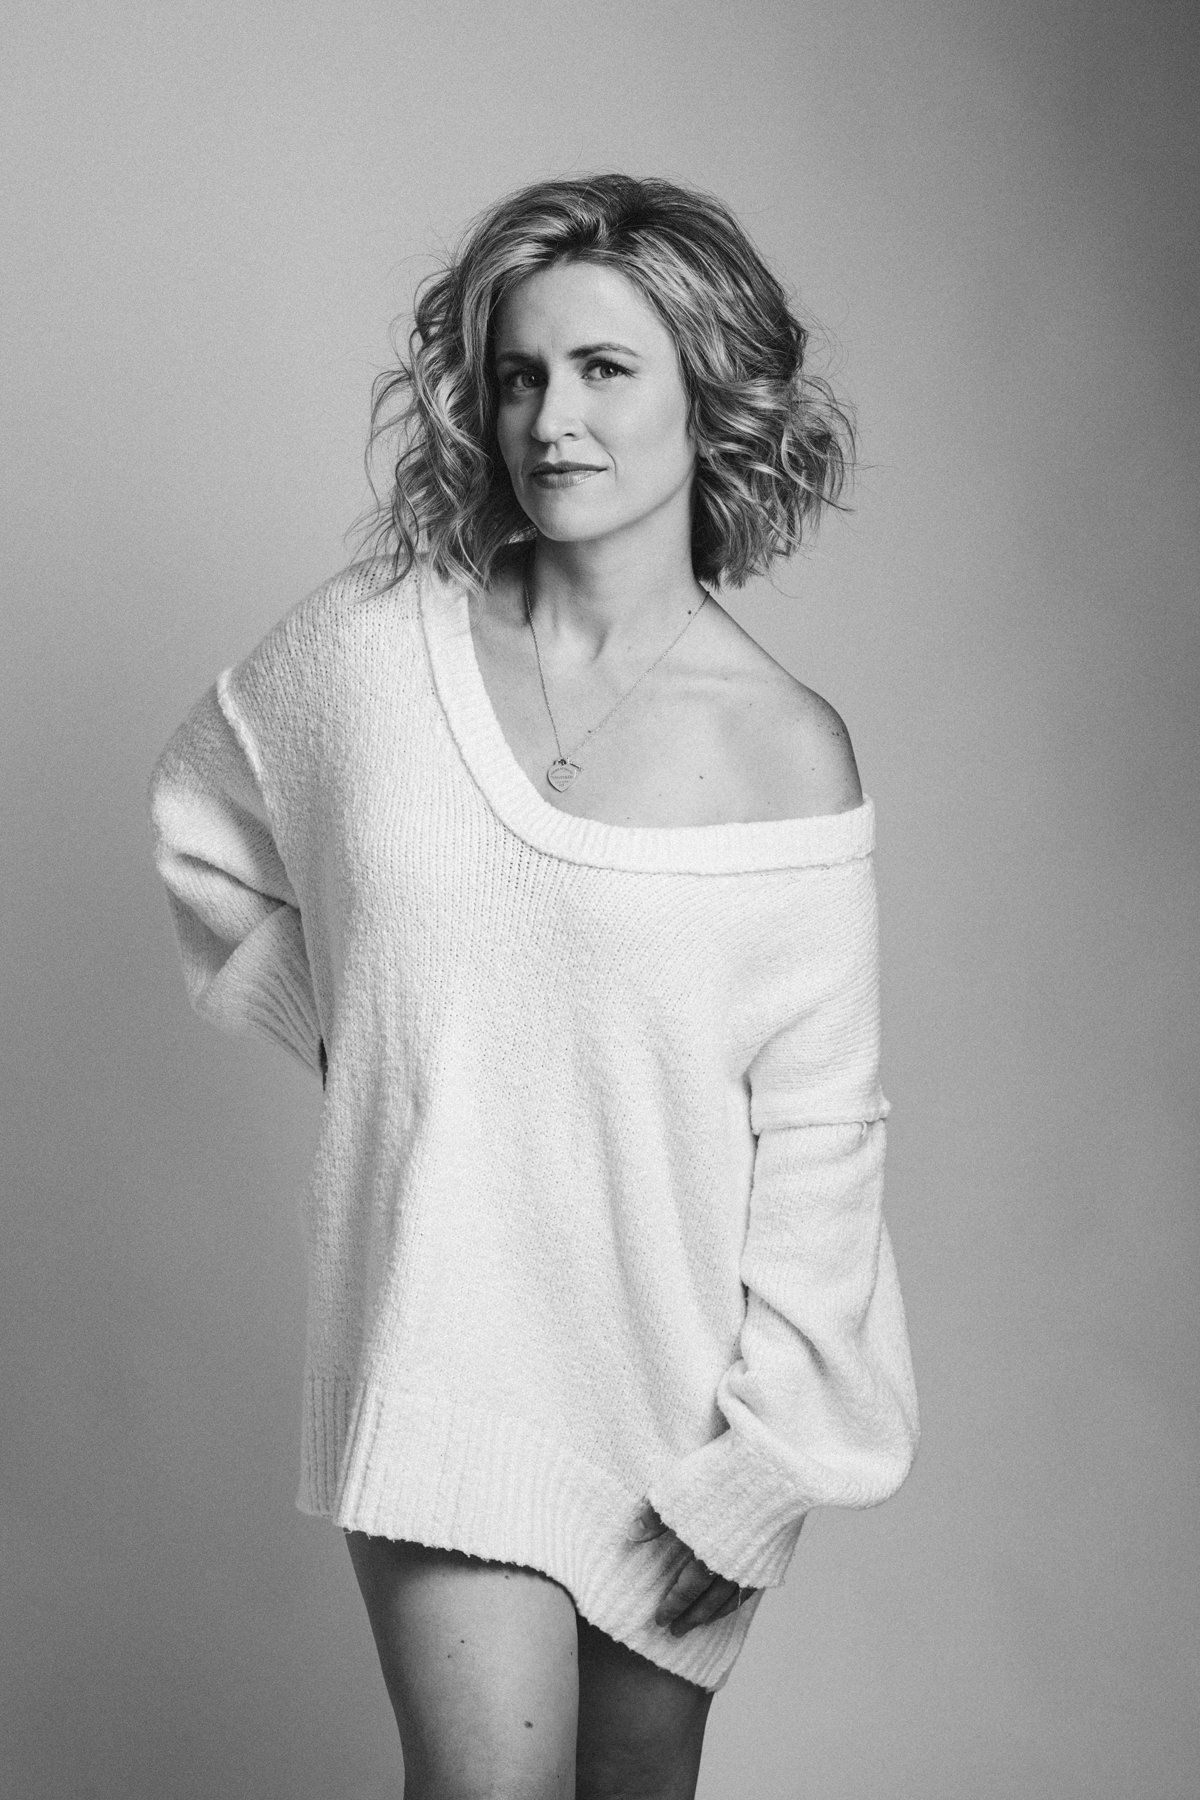 A black and white portrait of a woman wearing an oversized white sweater.